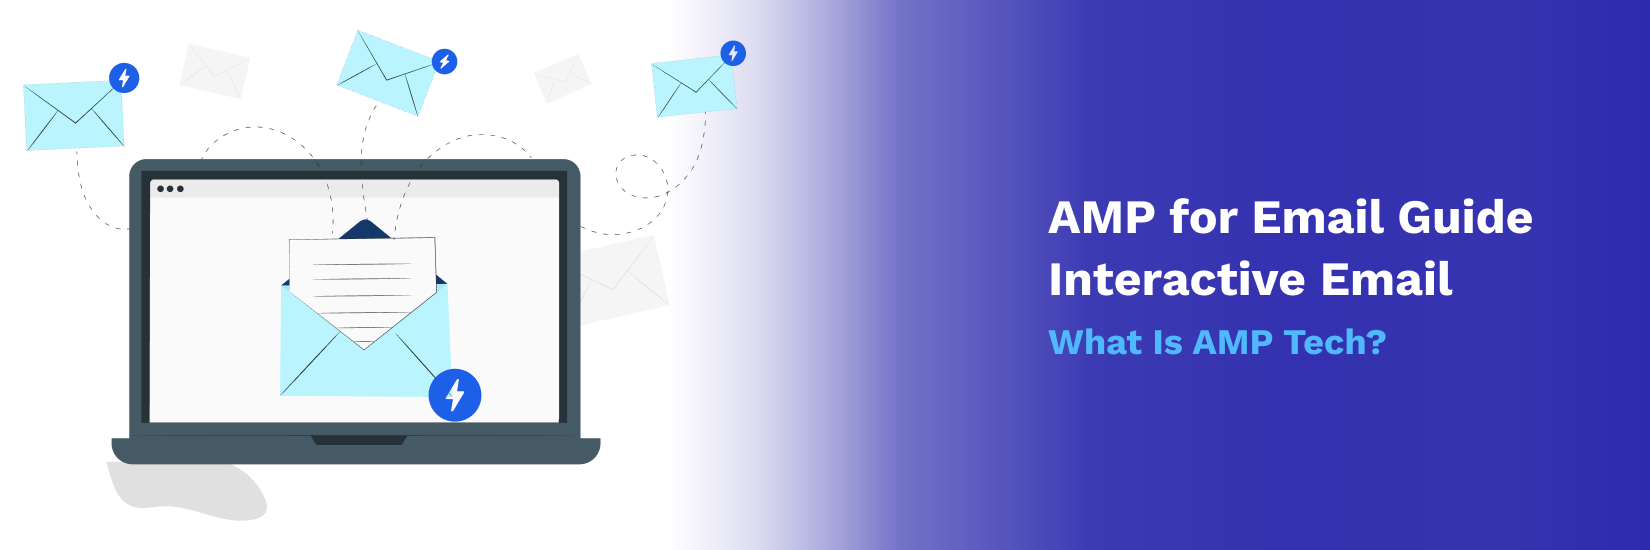 AMP for Email Guide – Interactive Email – What Is AMP Tech?